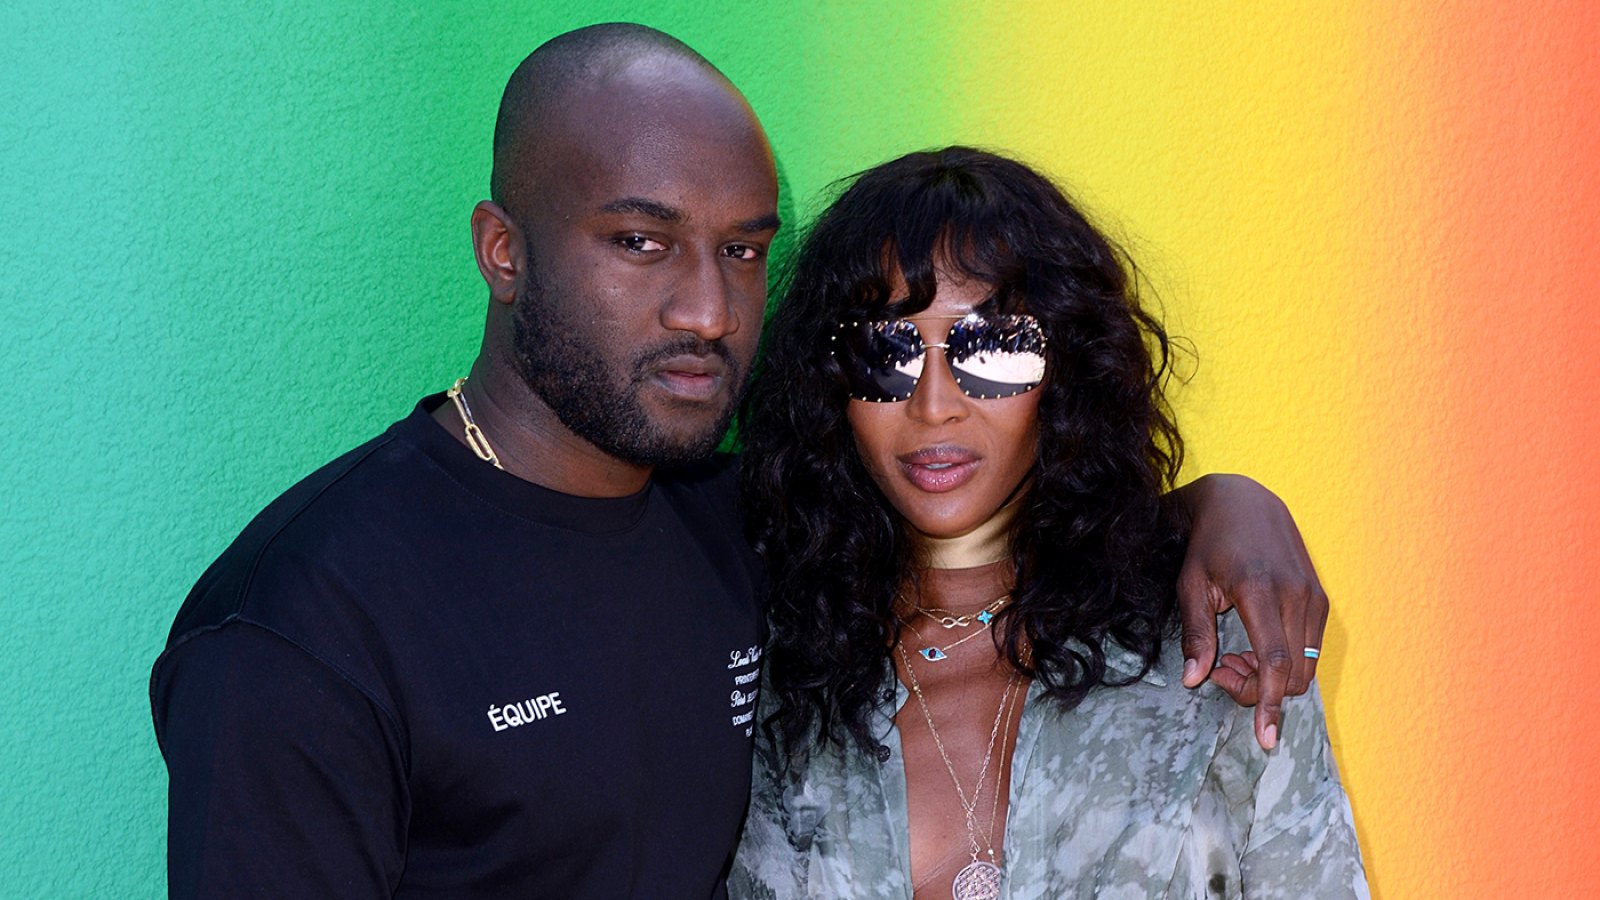 Virgil Abloh Is Honored at Louis Vuitton's Men's Show in Miami